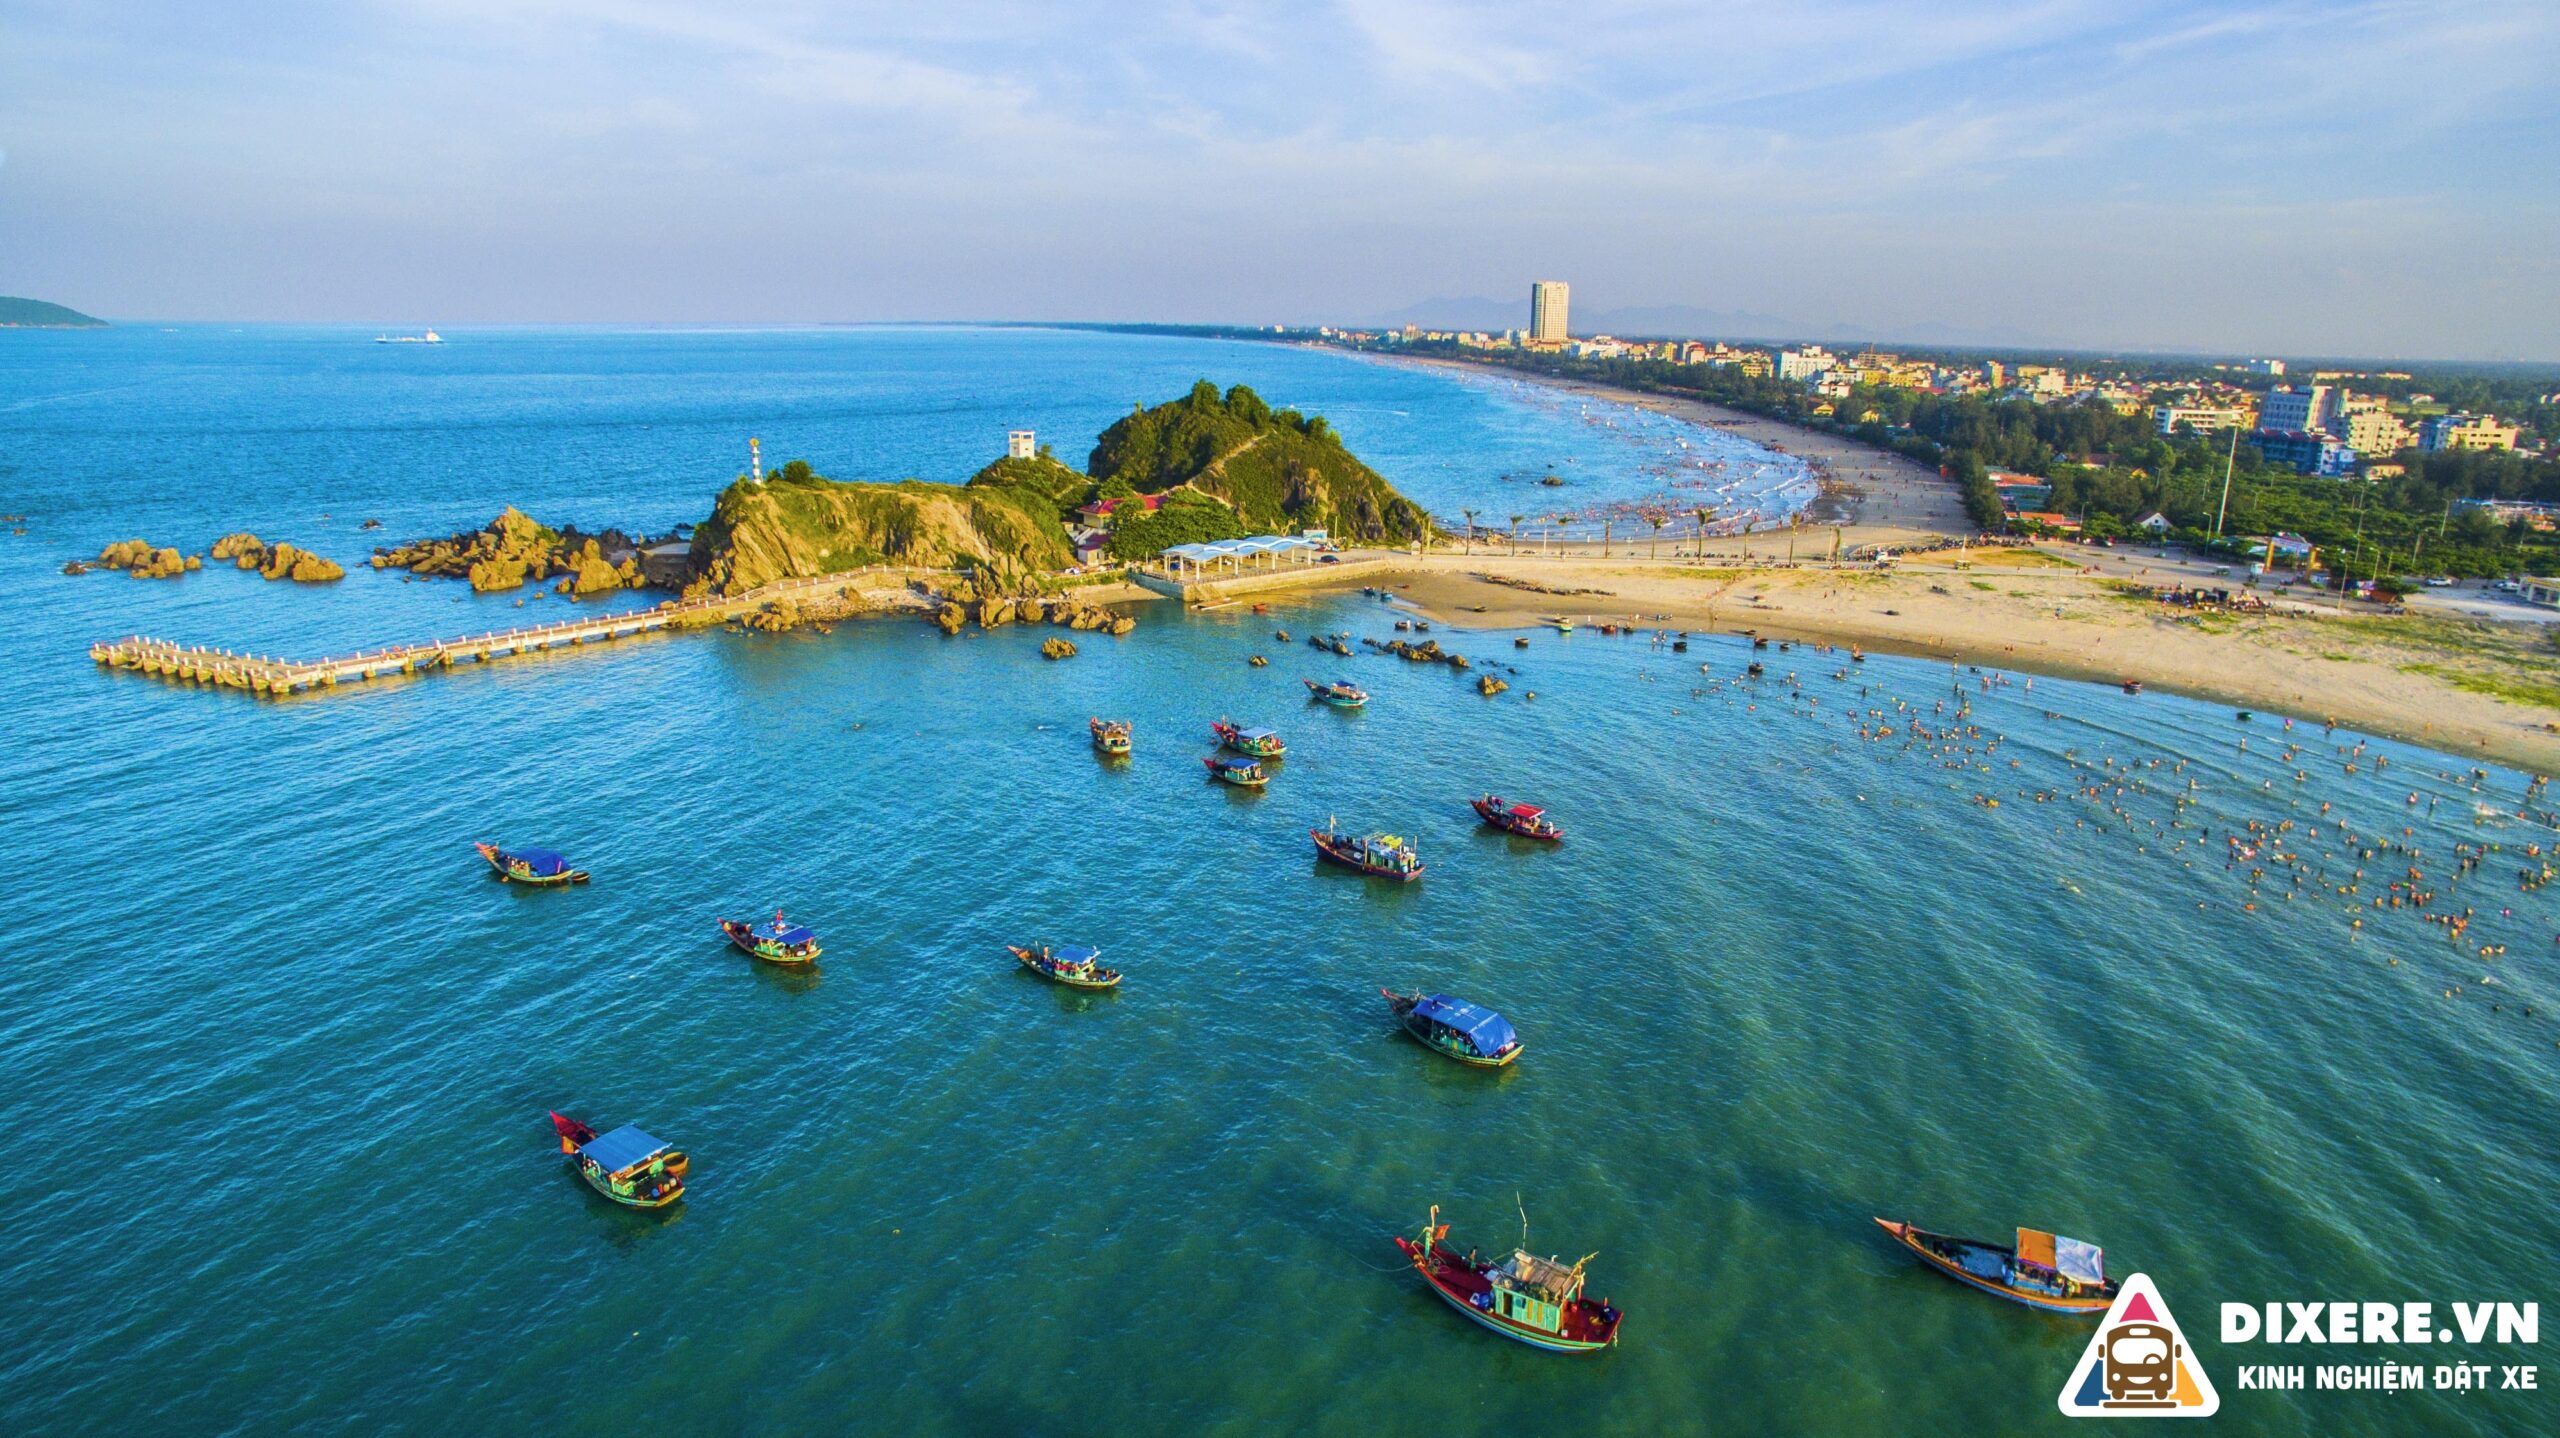 Cua Lo – A famous tourist site to travel from Hanoi to Cua Lo